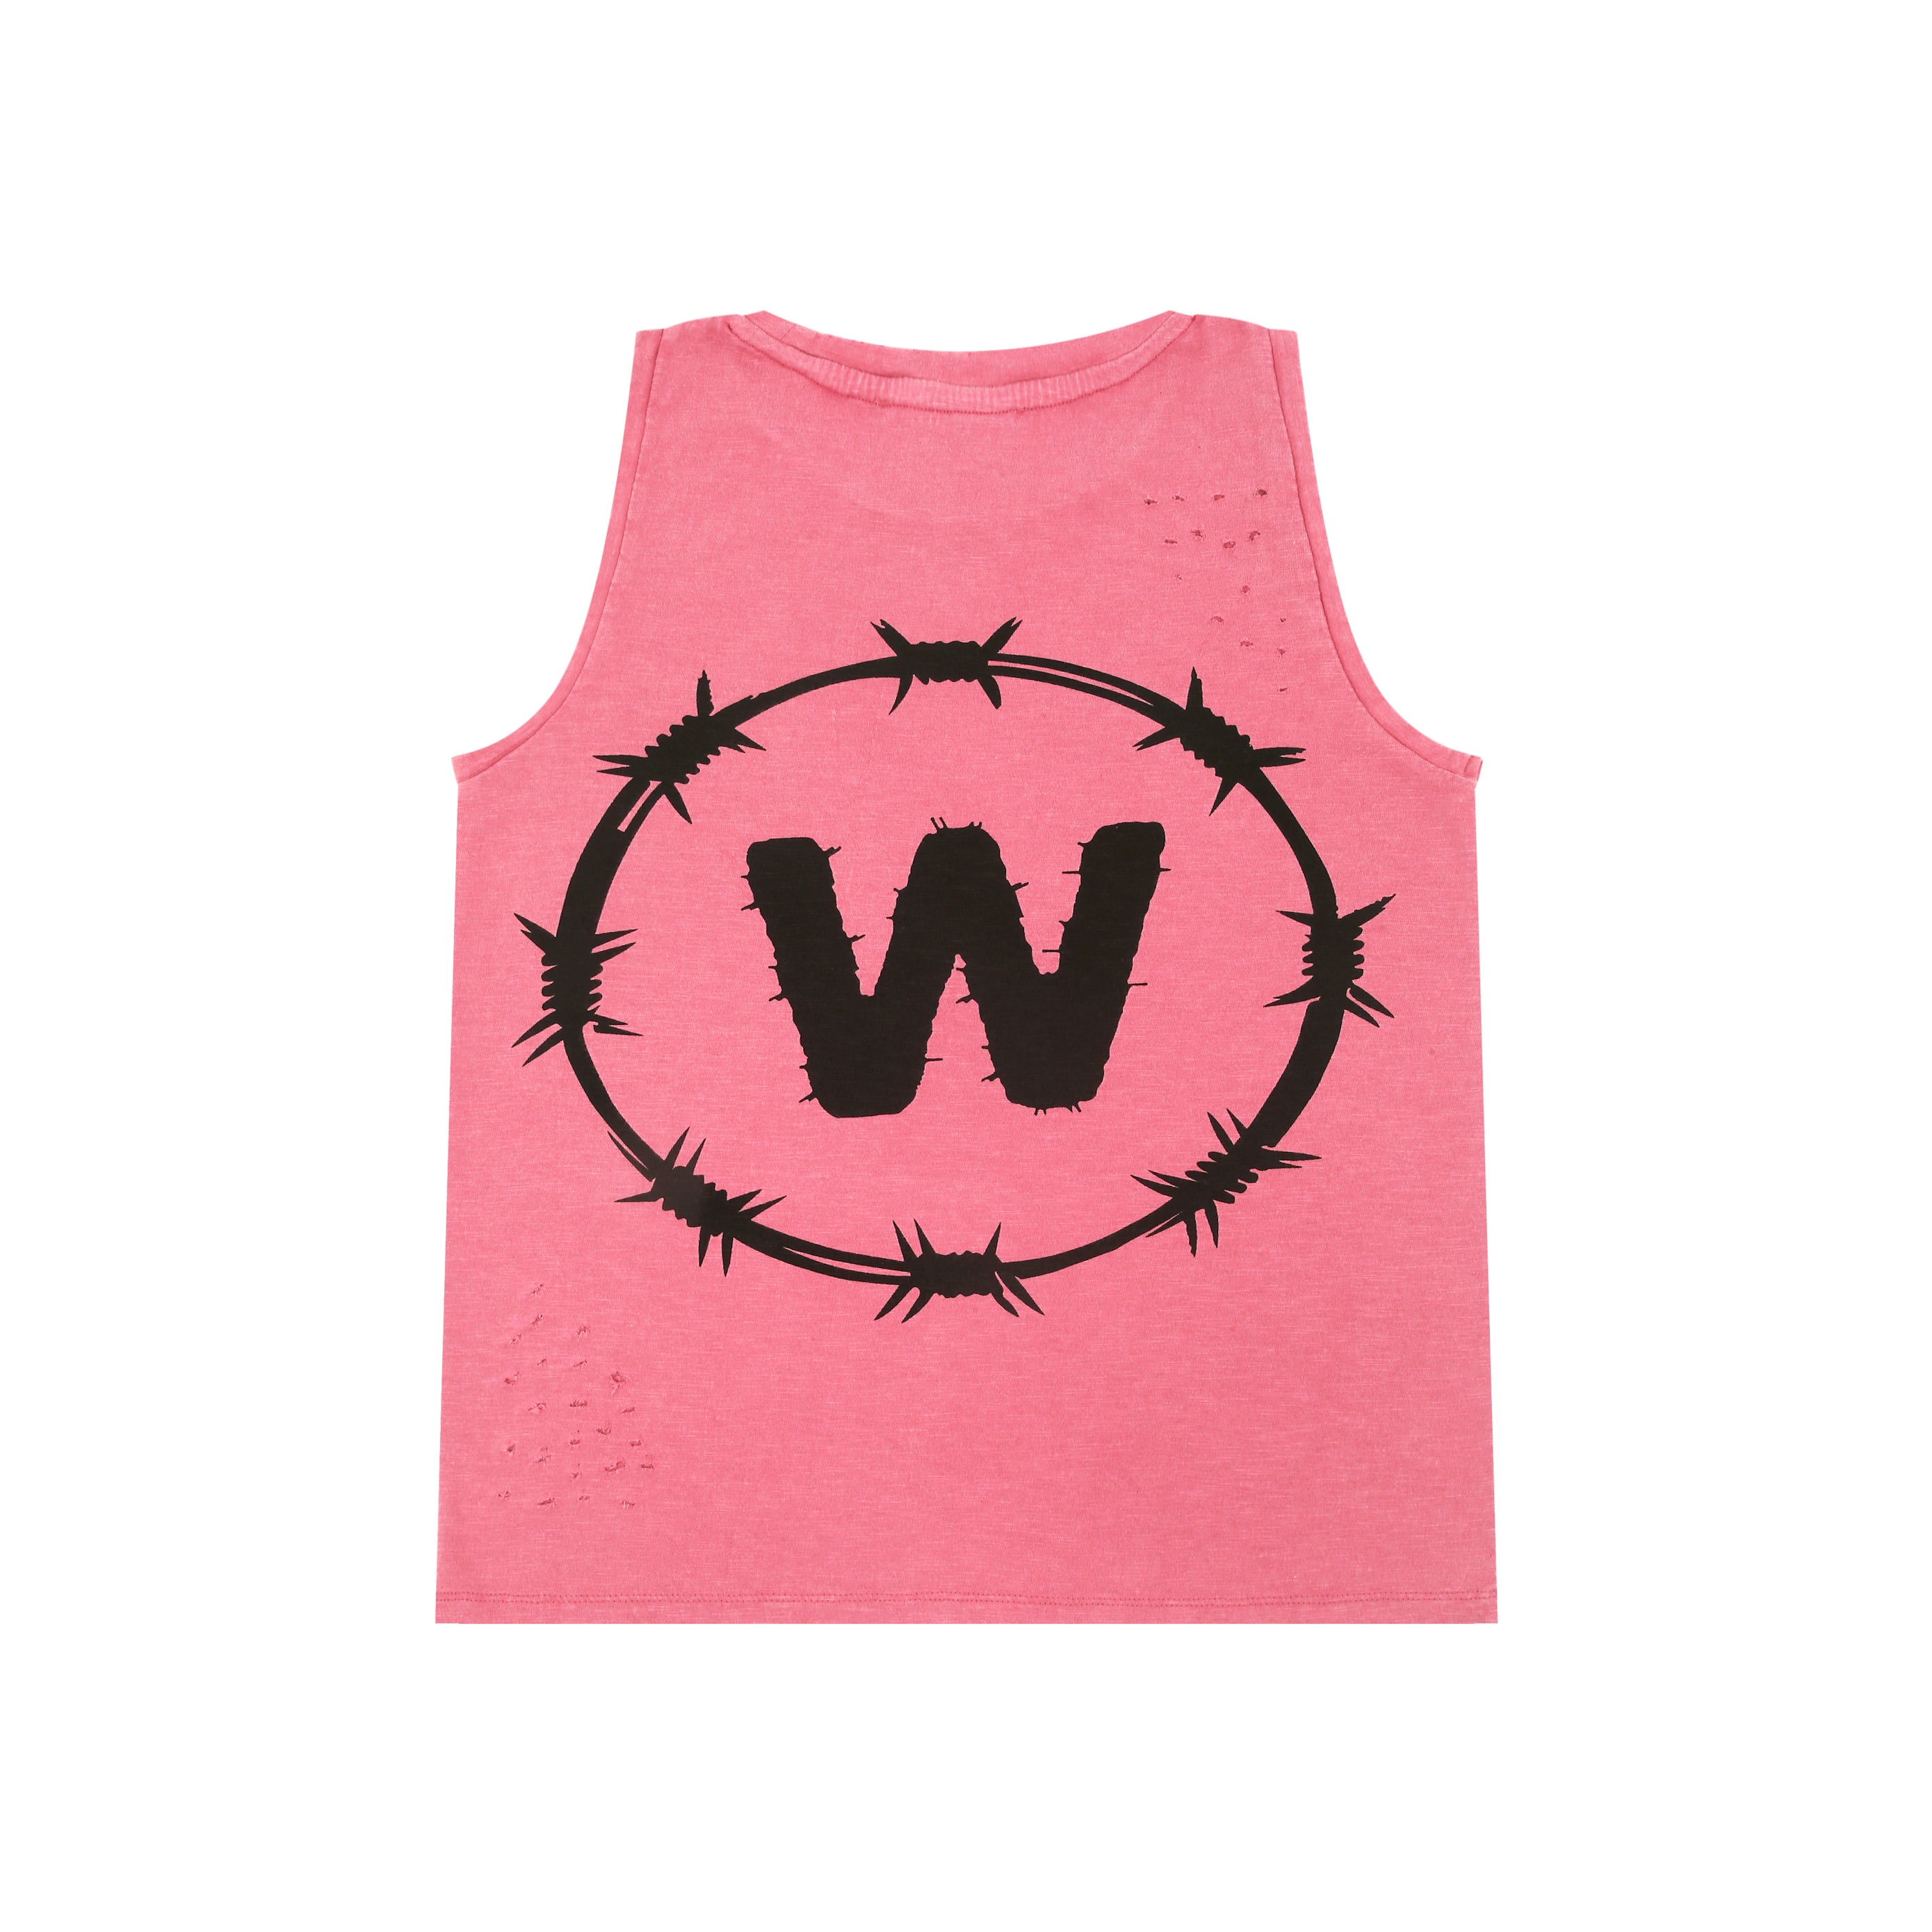 Candy - Round Neck Tank Top "Gone With The Wind"